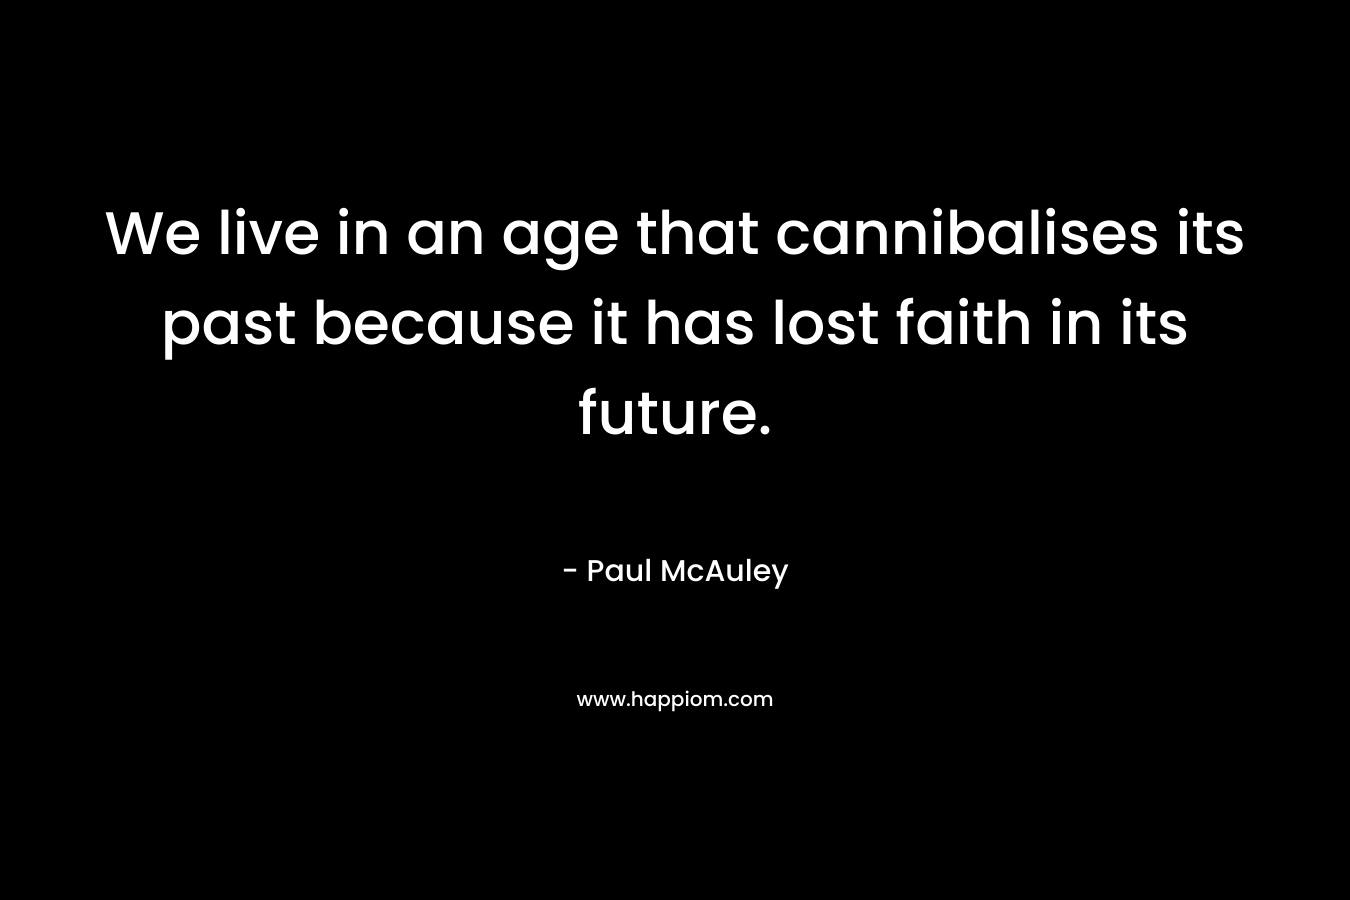 We live in an age that cannibalises its past because it has lost faith in its future. – Paul McAuley